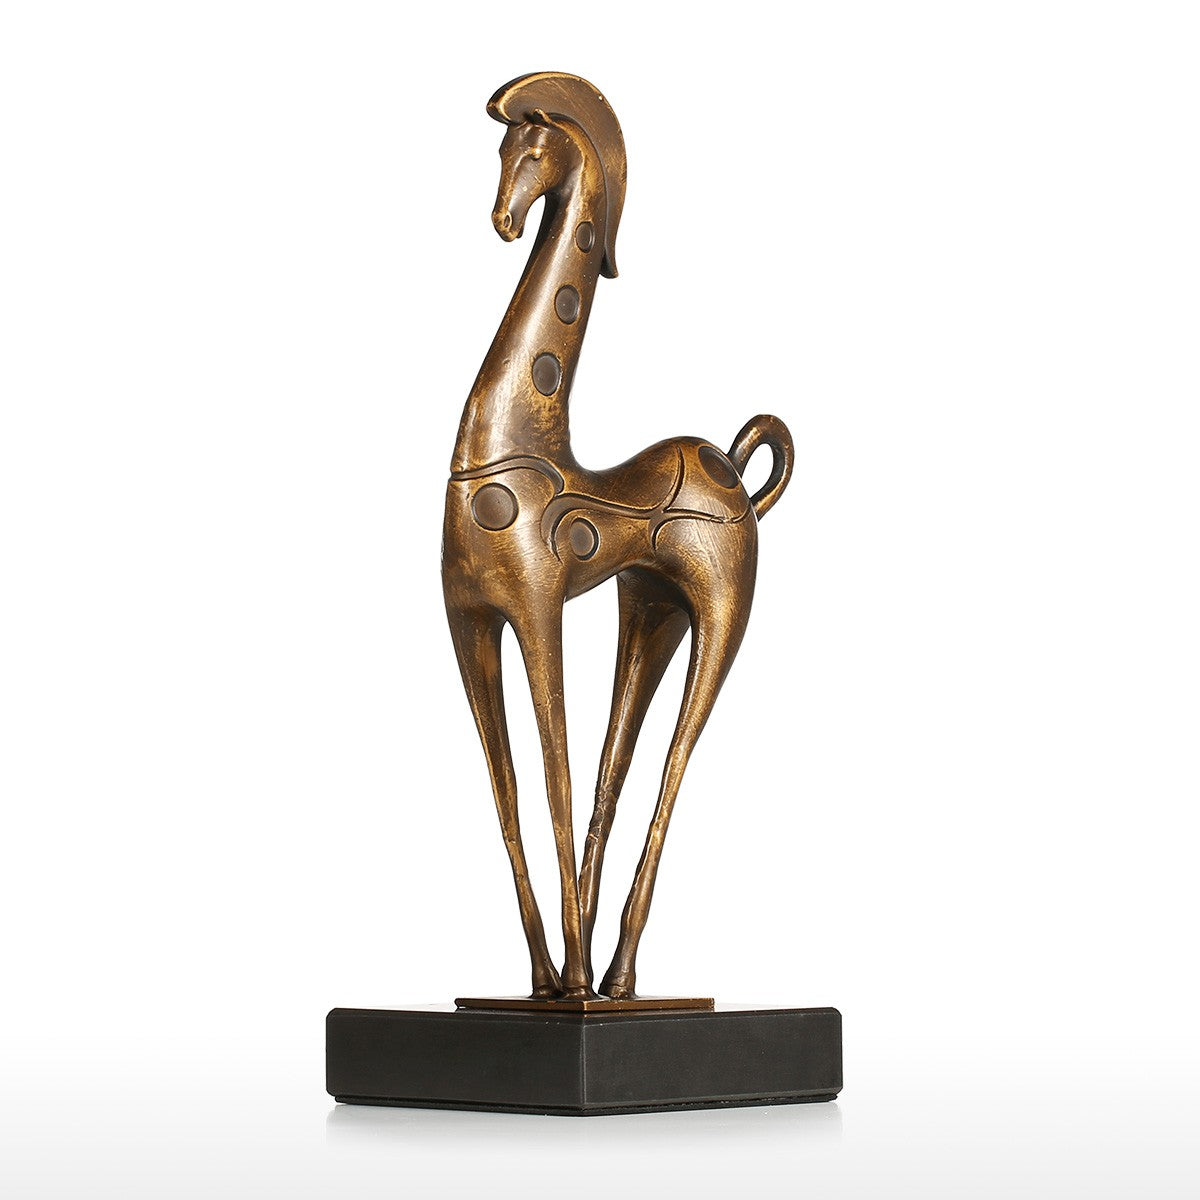 Art Deco Horse and Horse Decor with Horse Sculpture for Horse Gifts